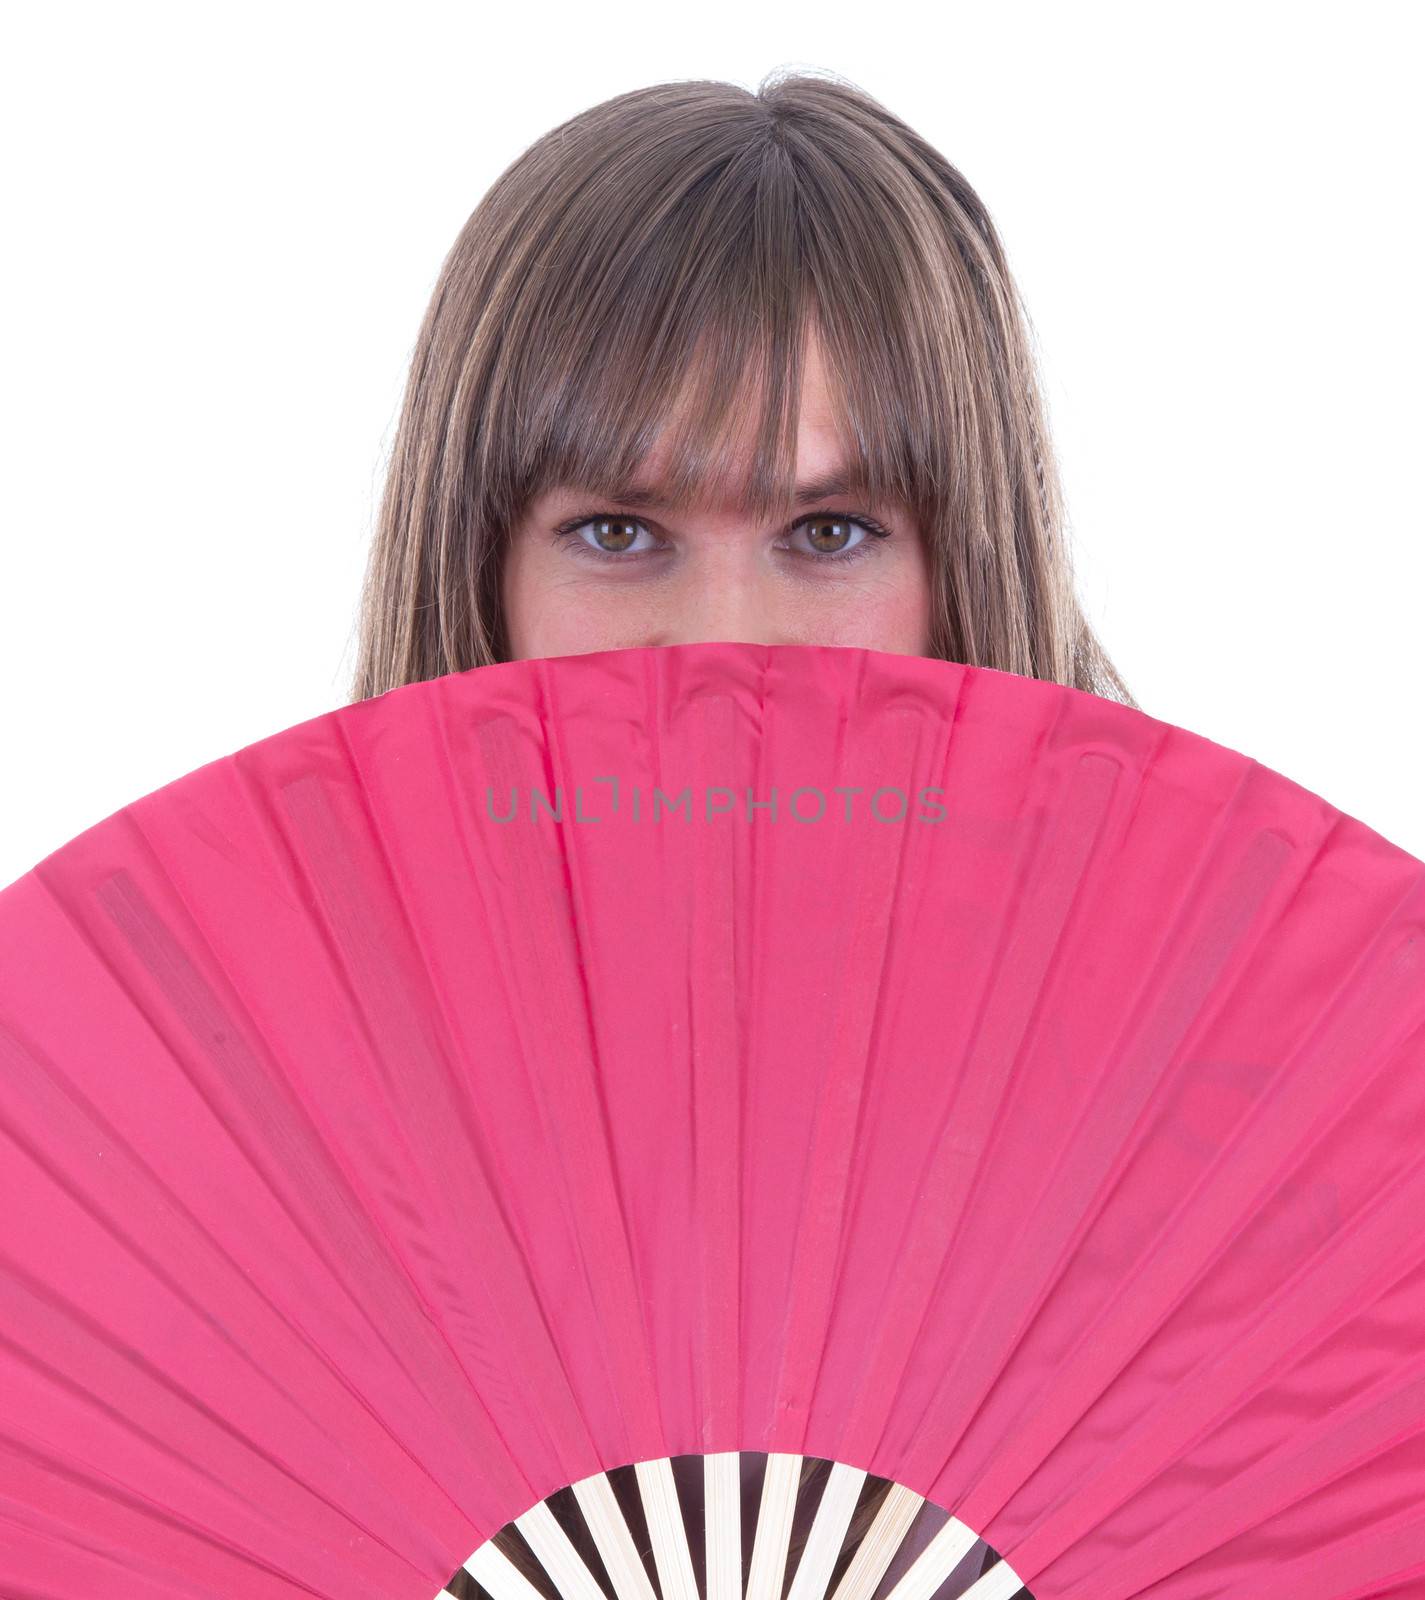 Studio portrait of a womans face partly hidden by a fan, isolated on white